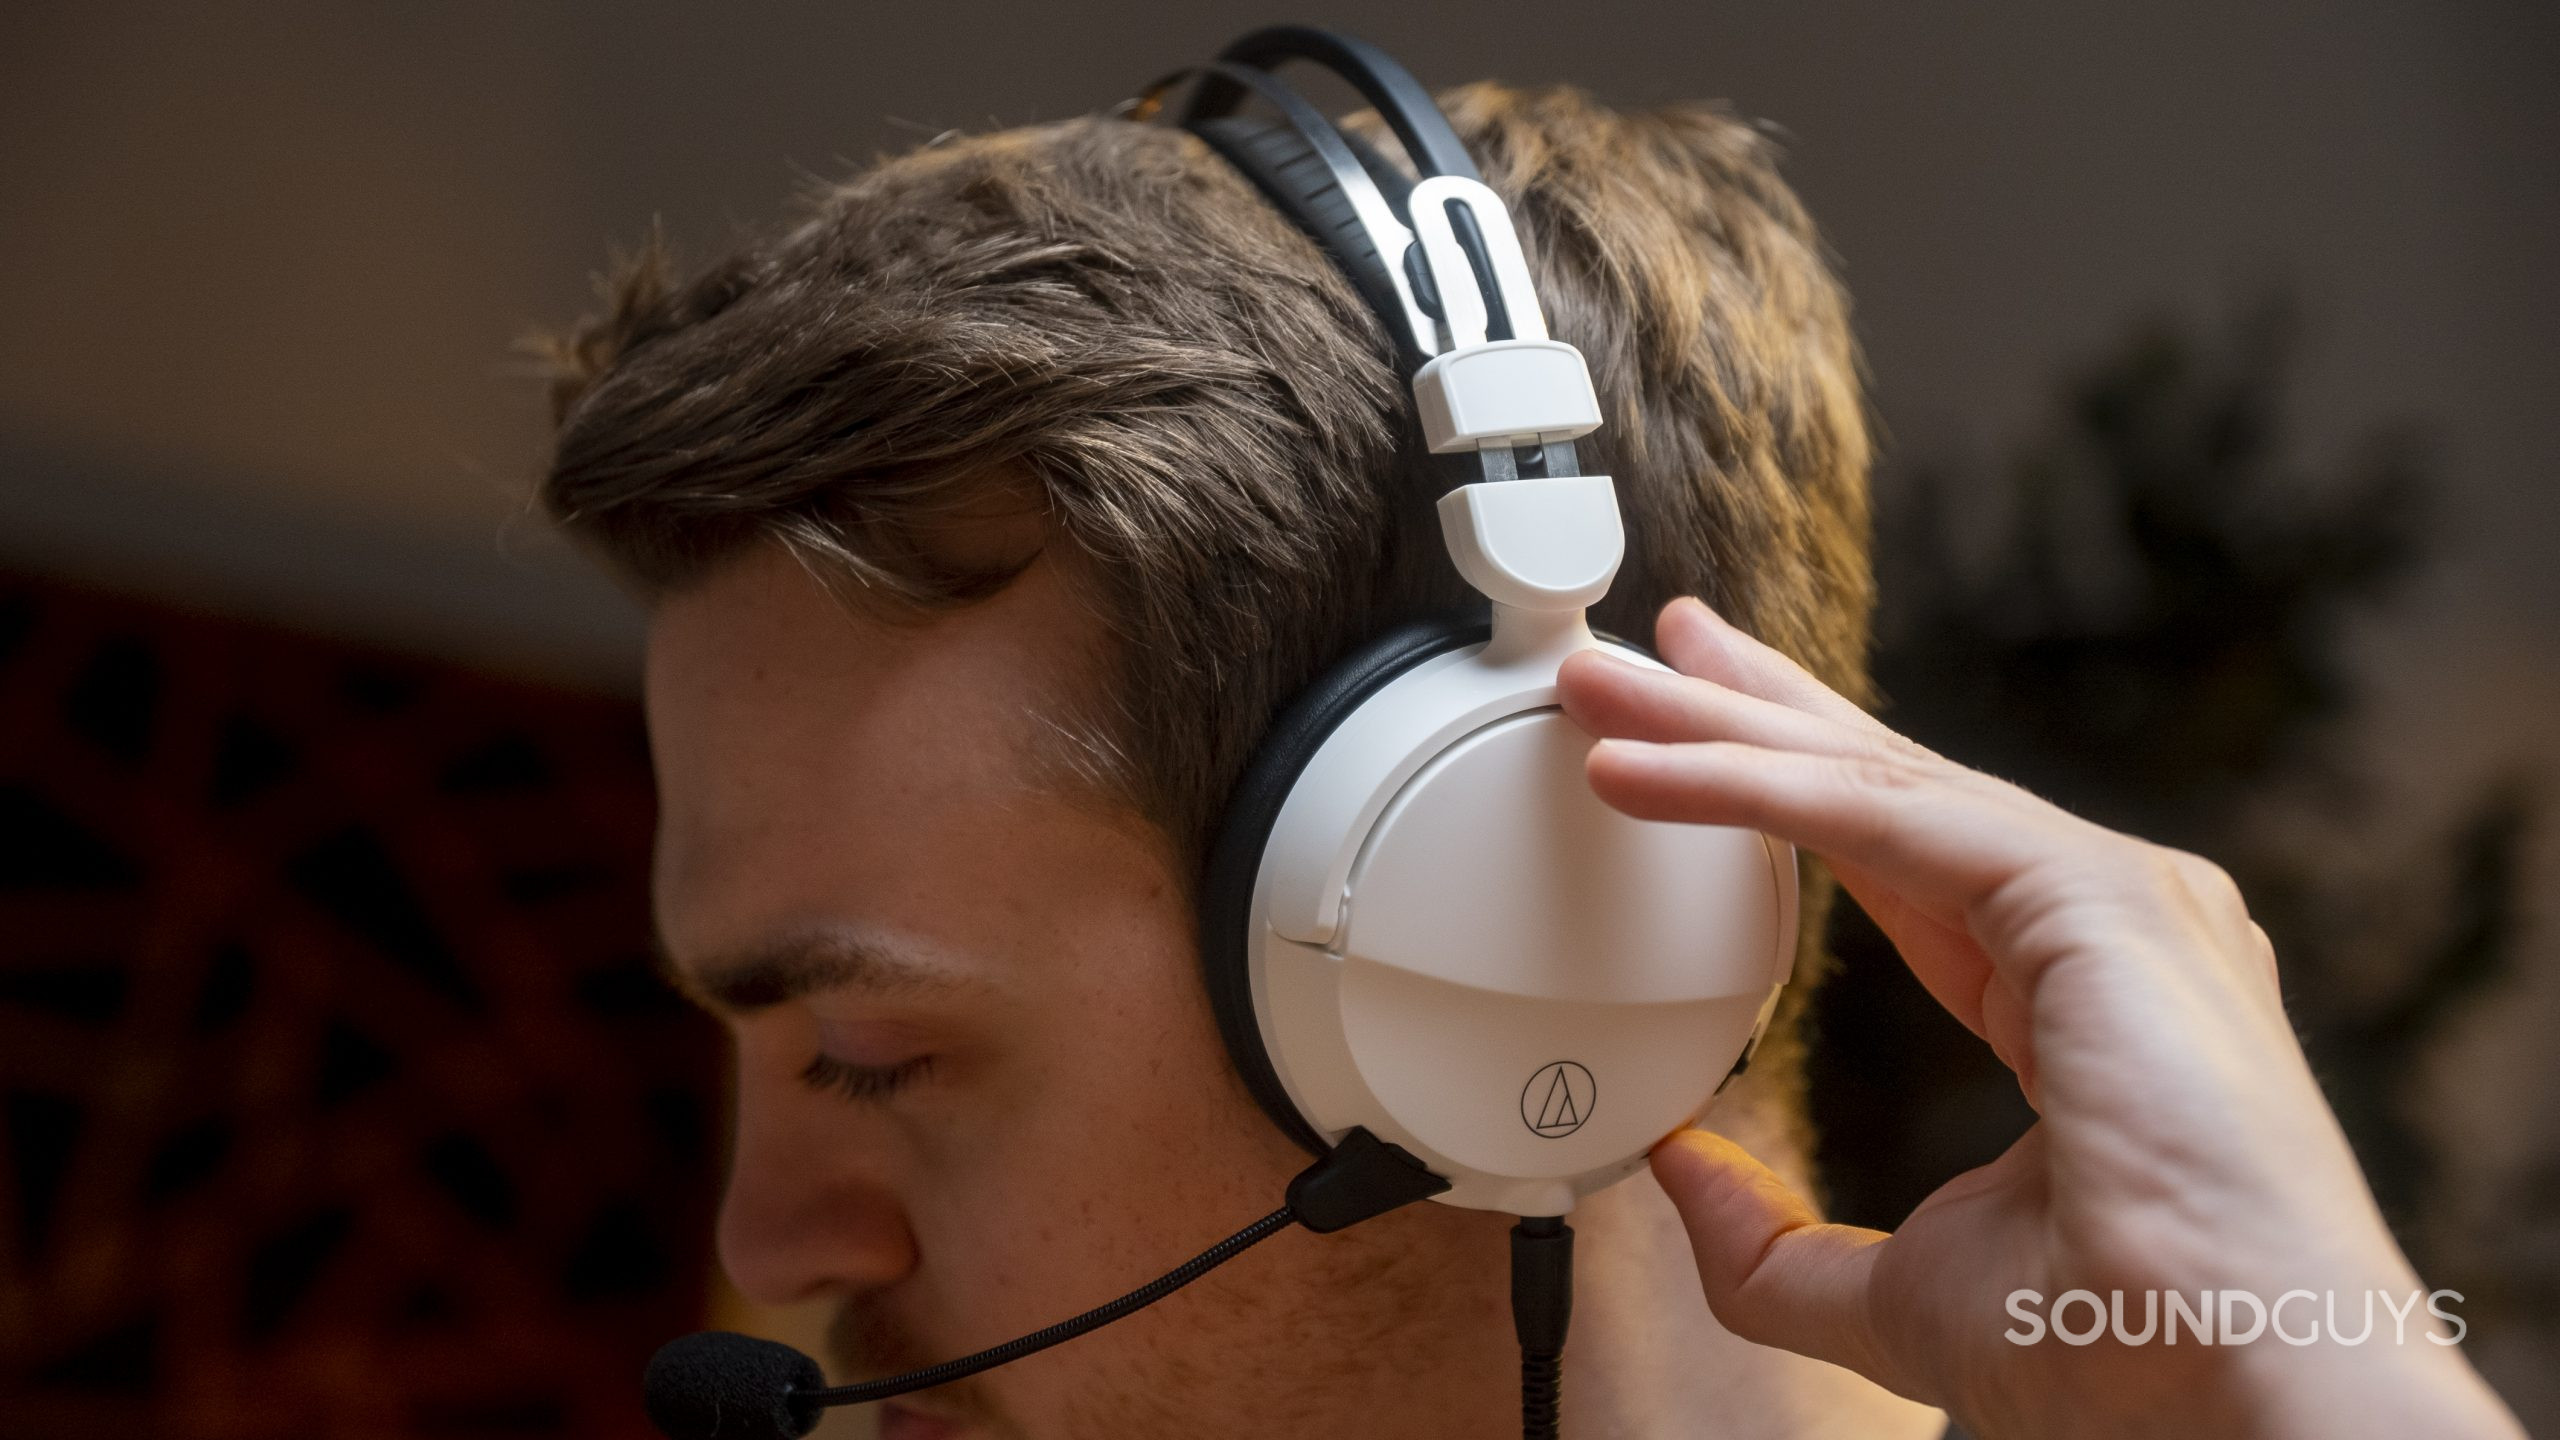 Audio-Technica ATH-GL3 gaming headset and uses the controls on the left headphone.